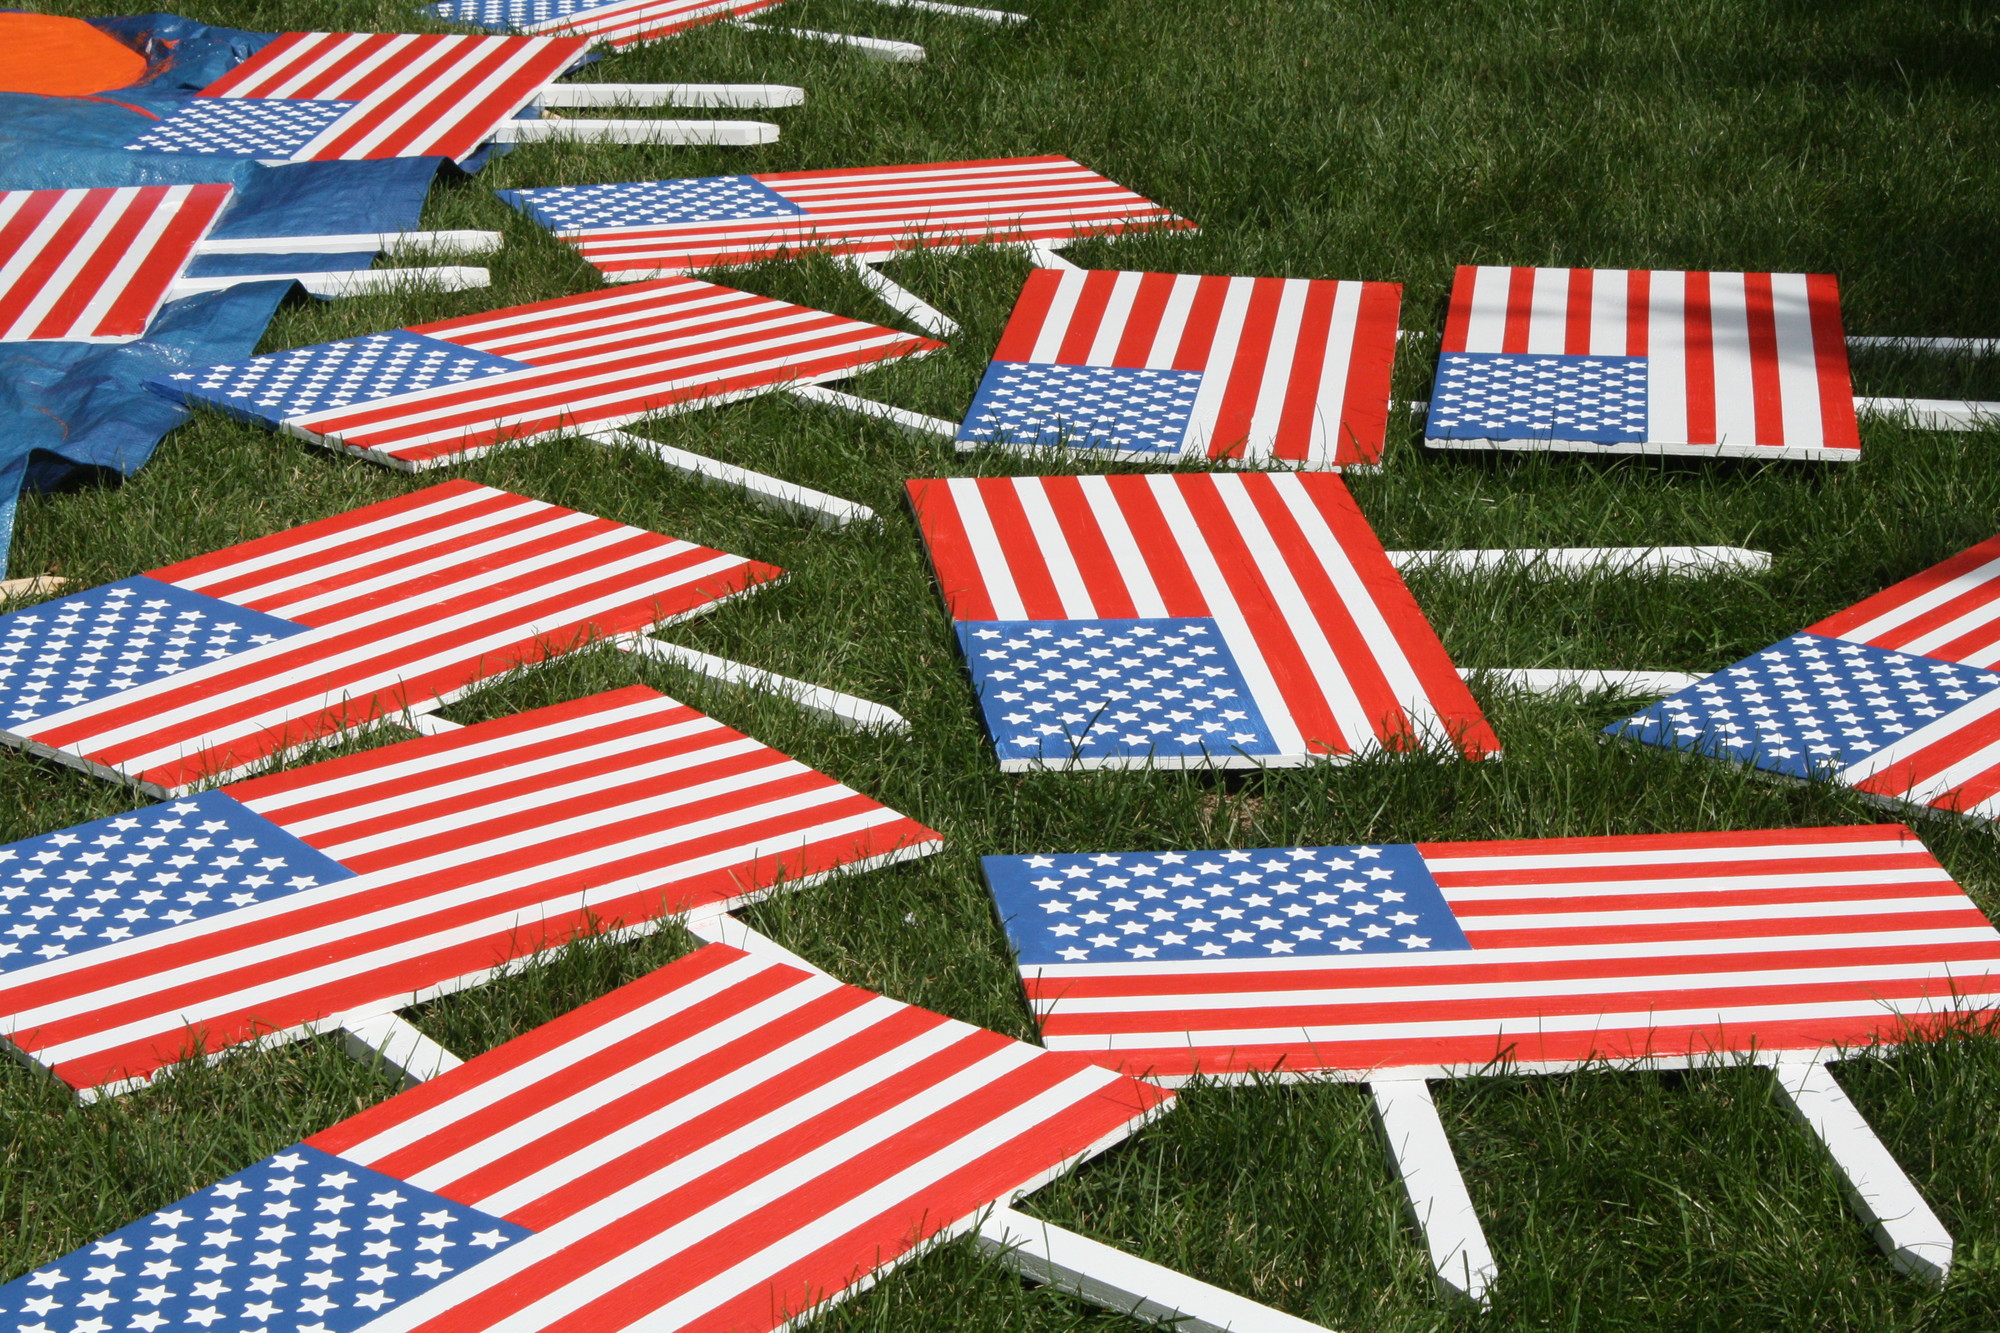 Many freshly painted American flag lawn signs were left out to dry in the sun.